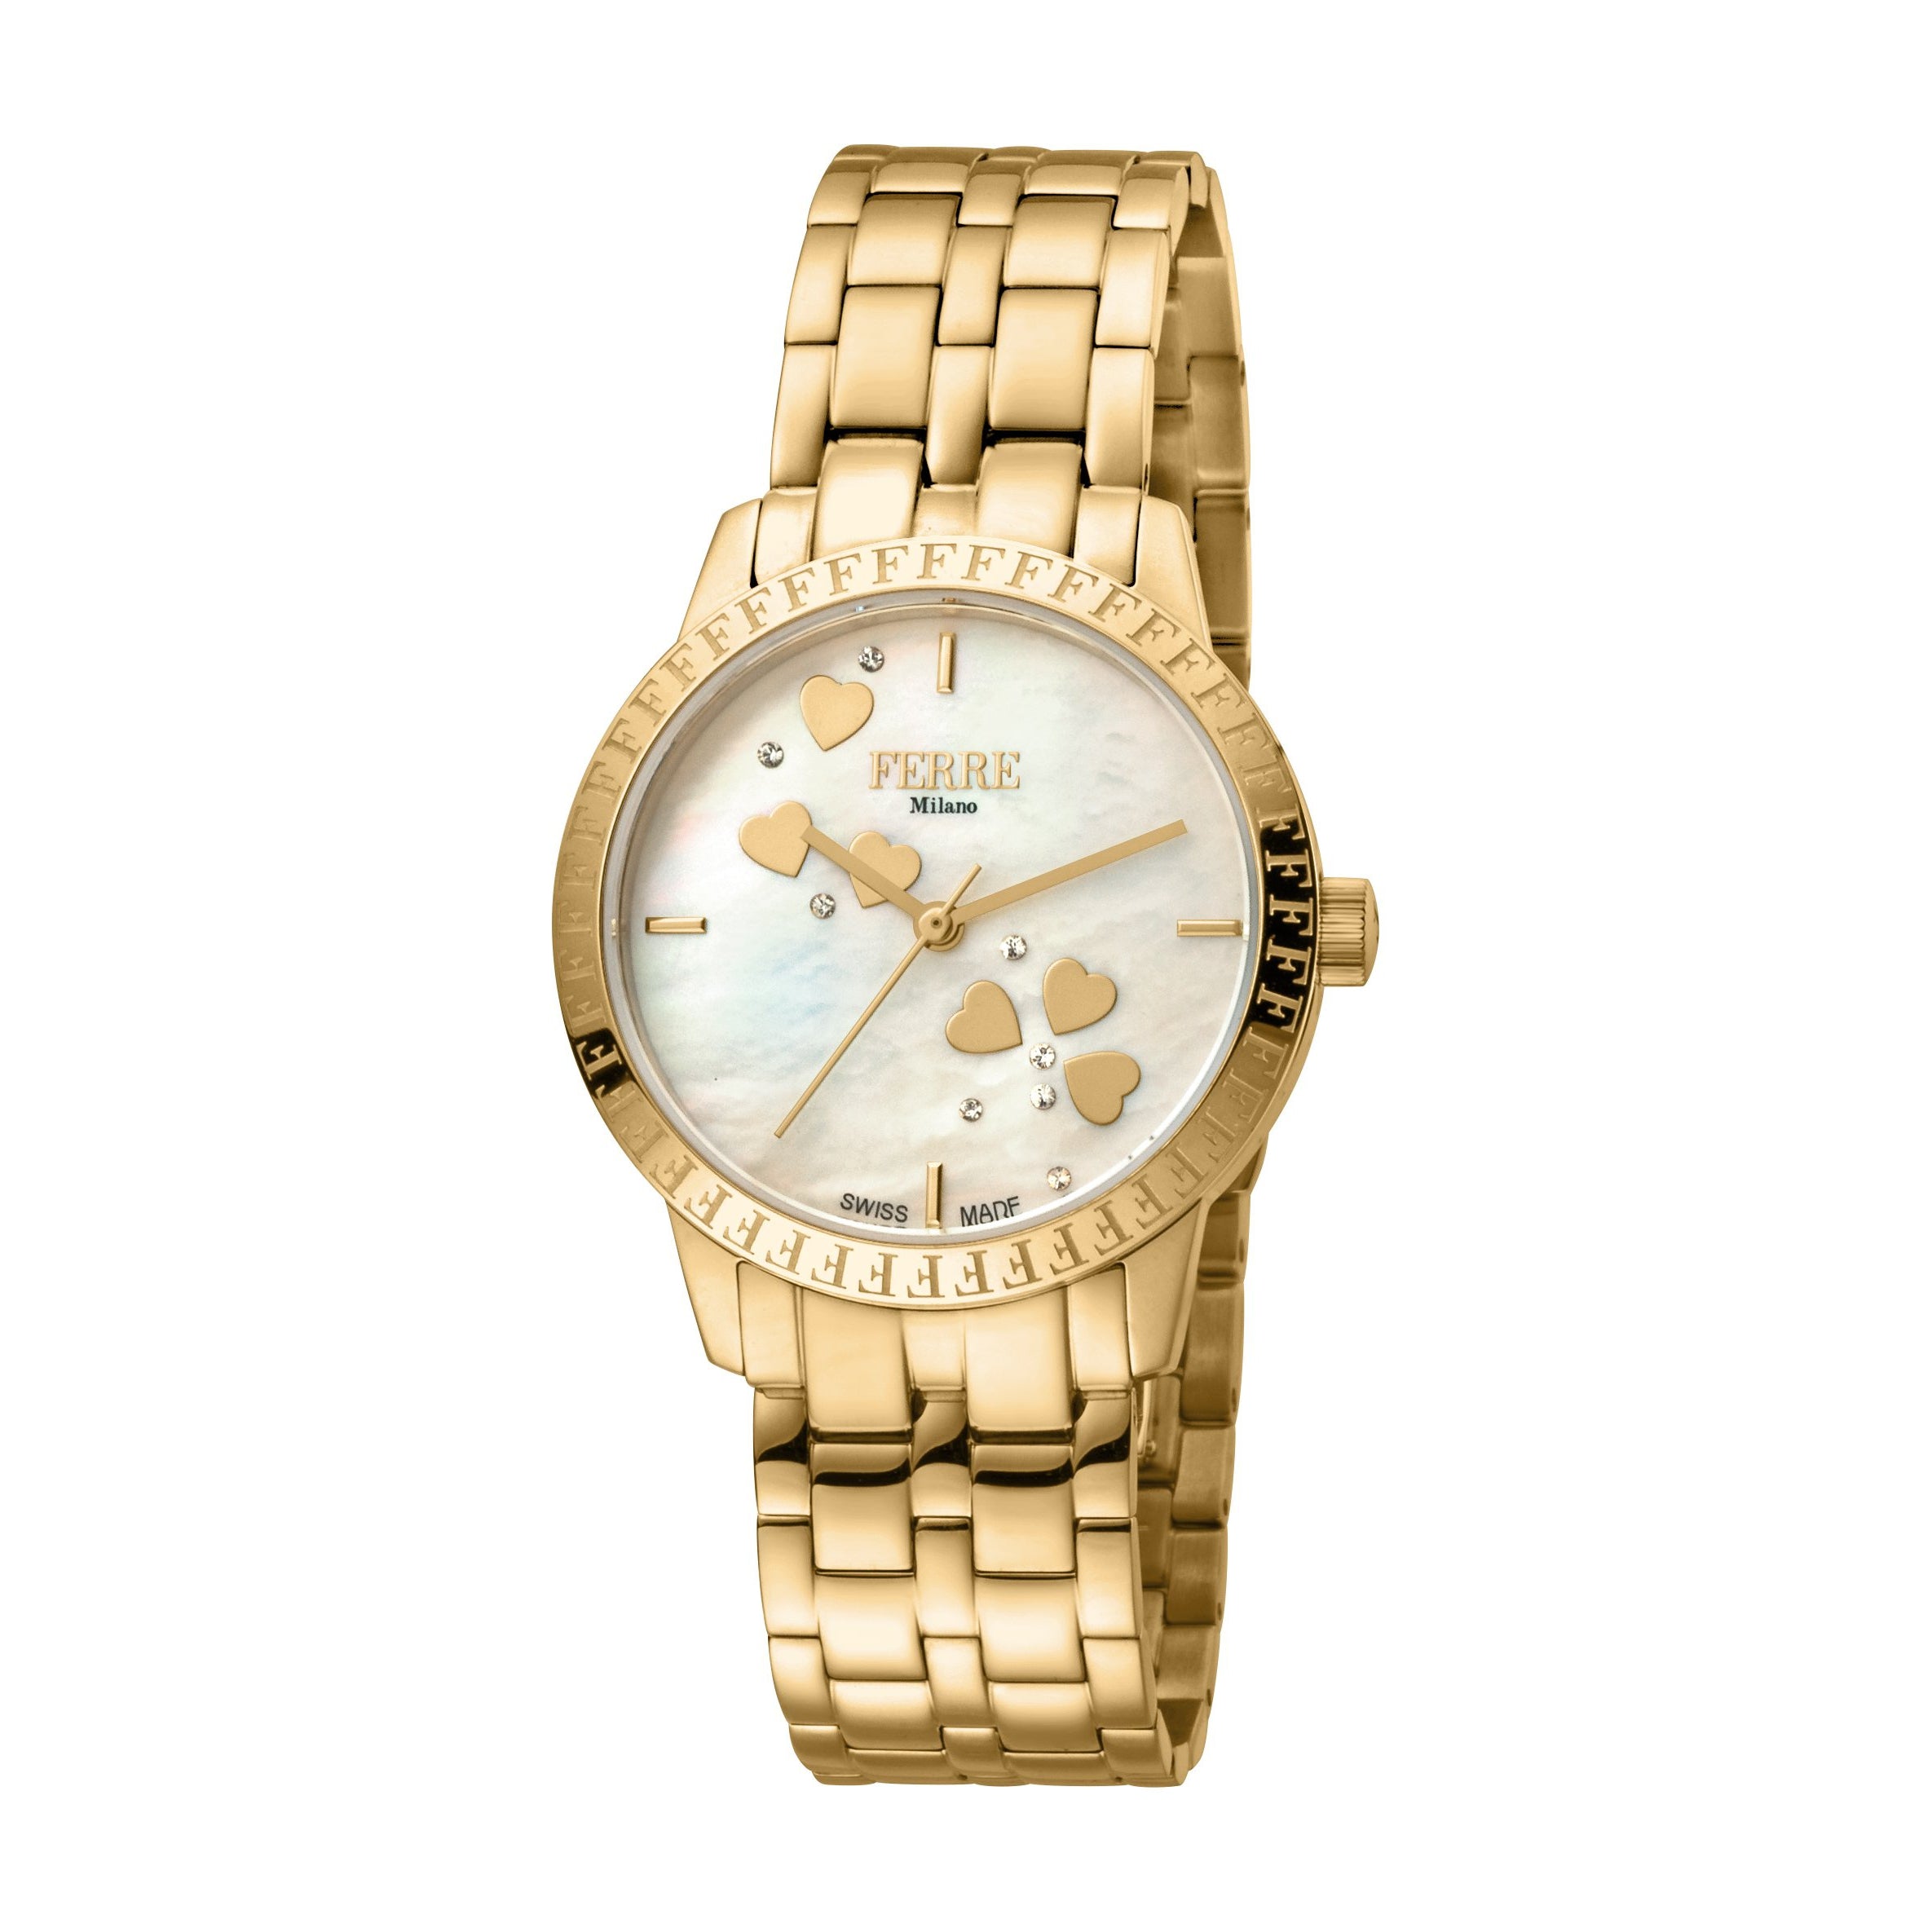 Women's Stainless Steel White Mother of Pearl Dial Watch | Ferre Milano  FM1L084M0101 | World of Watches